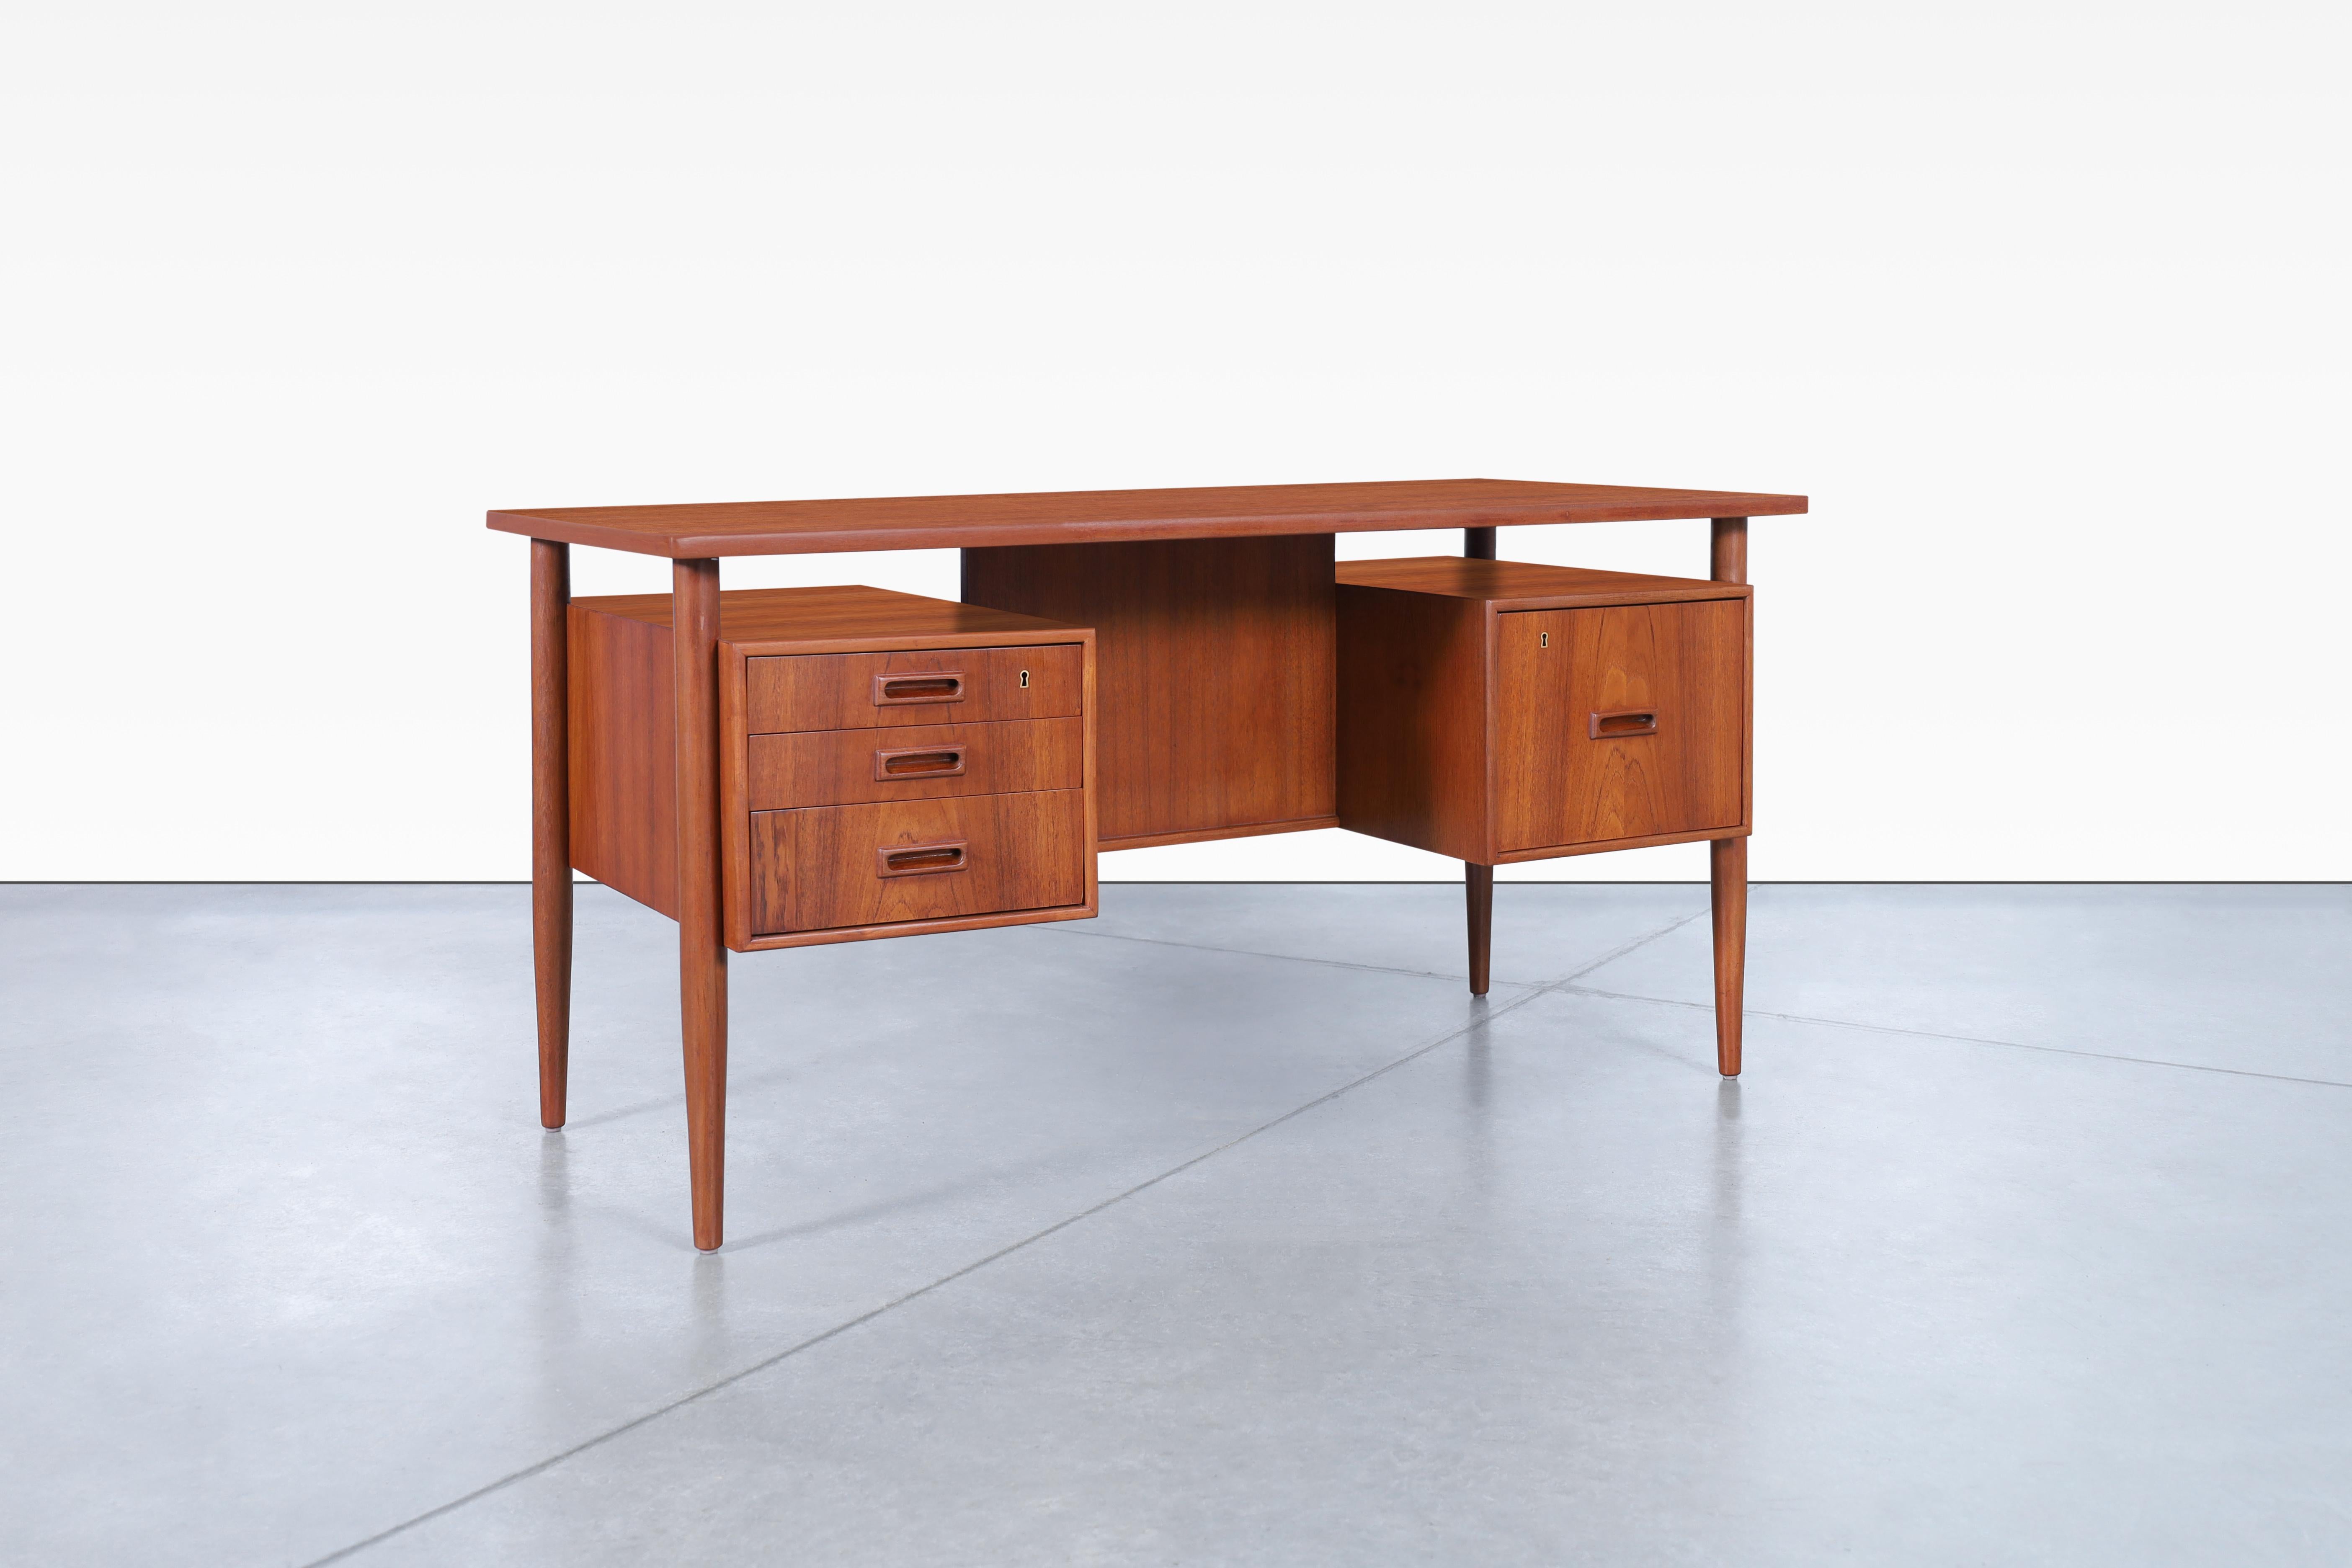 Beautiful Danish modern floating top teak desk designed by Johannes Sorth for Bornholm Møbelfabrik in Denmark, circa 1960s. Features a total of four dovetail drawers, which the right drawer is a file drawer that will be quite useful for storing your